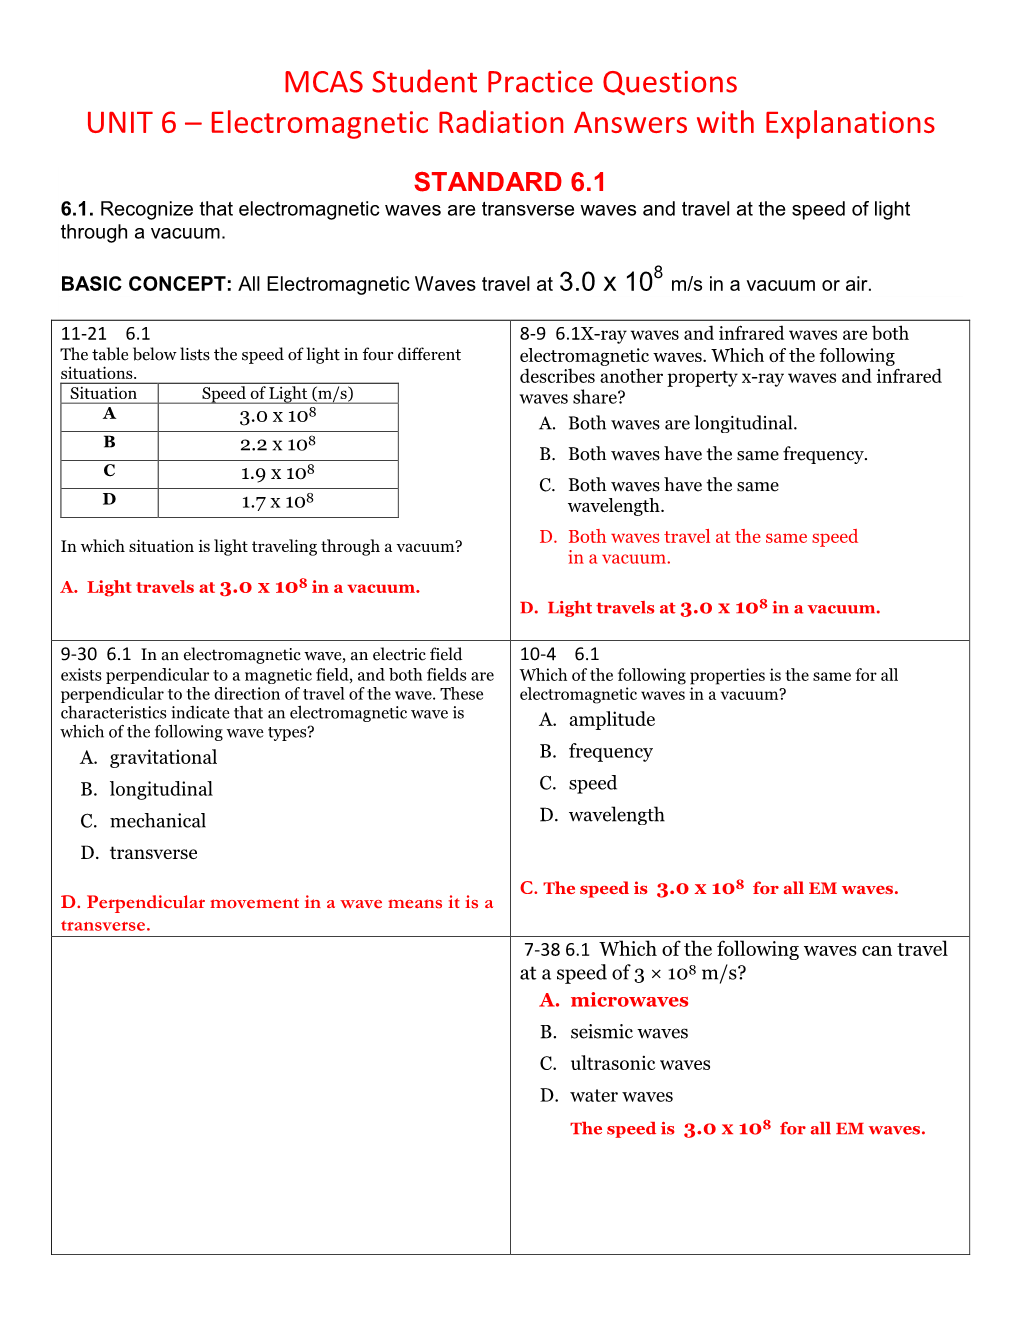 MCAS Student Practice Questions UNIT 6 – Electromagnetic Radiation Answers with Explanations